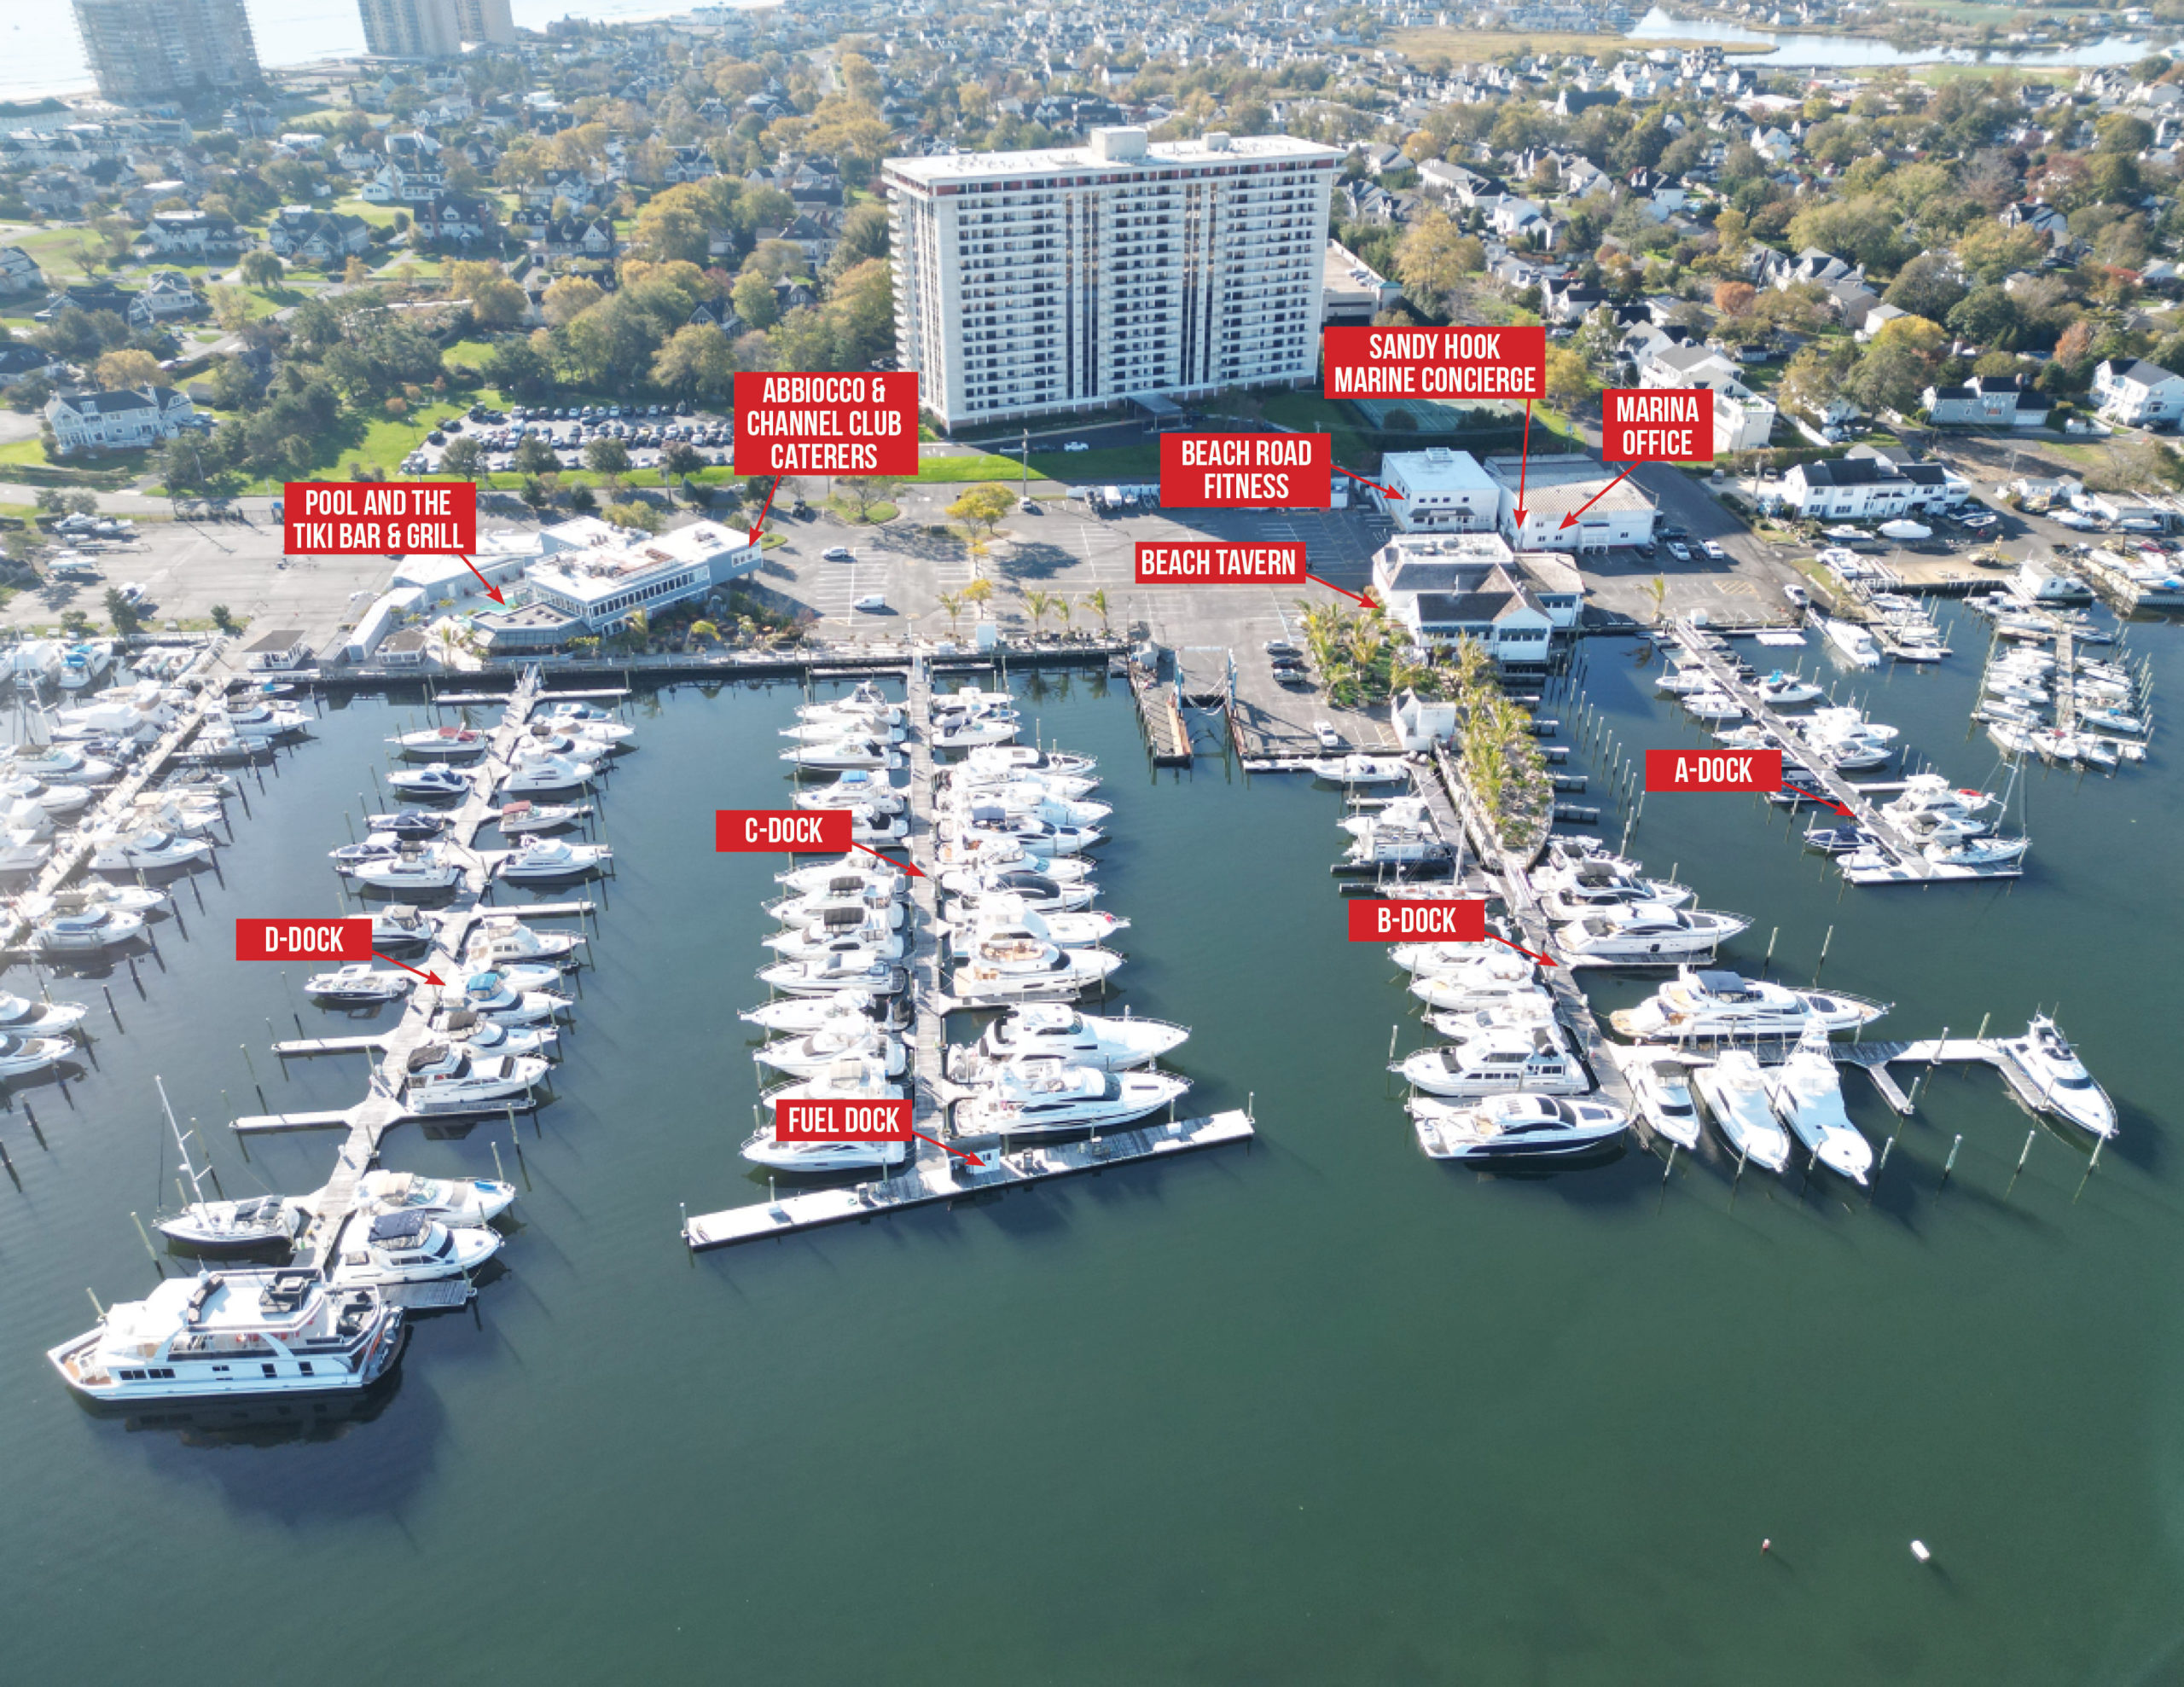 Property Map at Channel Club Marina